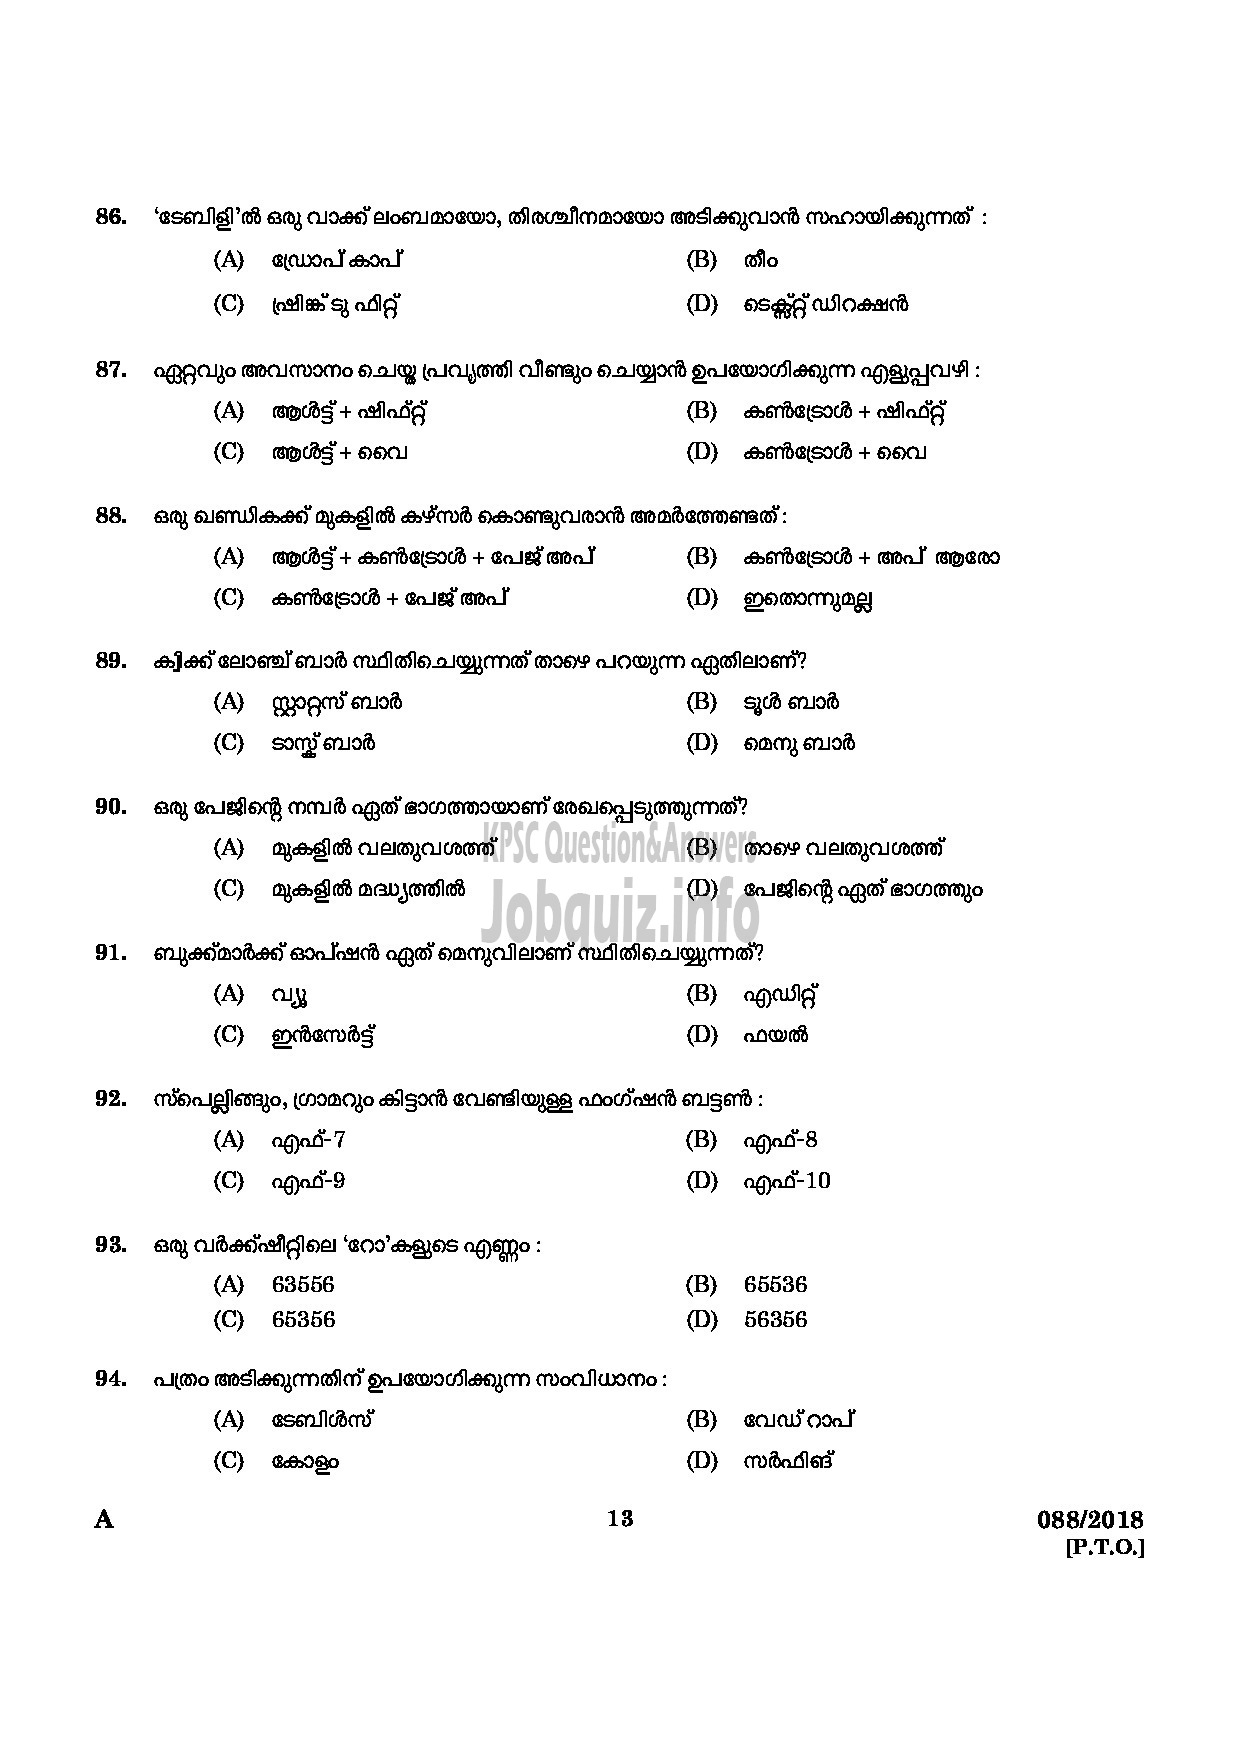 Kerala PSC Question Paper - REPORTER GR II MALAYALAM HEAD CONSTABLE GENERAL EXECUTIVE FORCE POLICE Malayalam-11